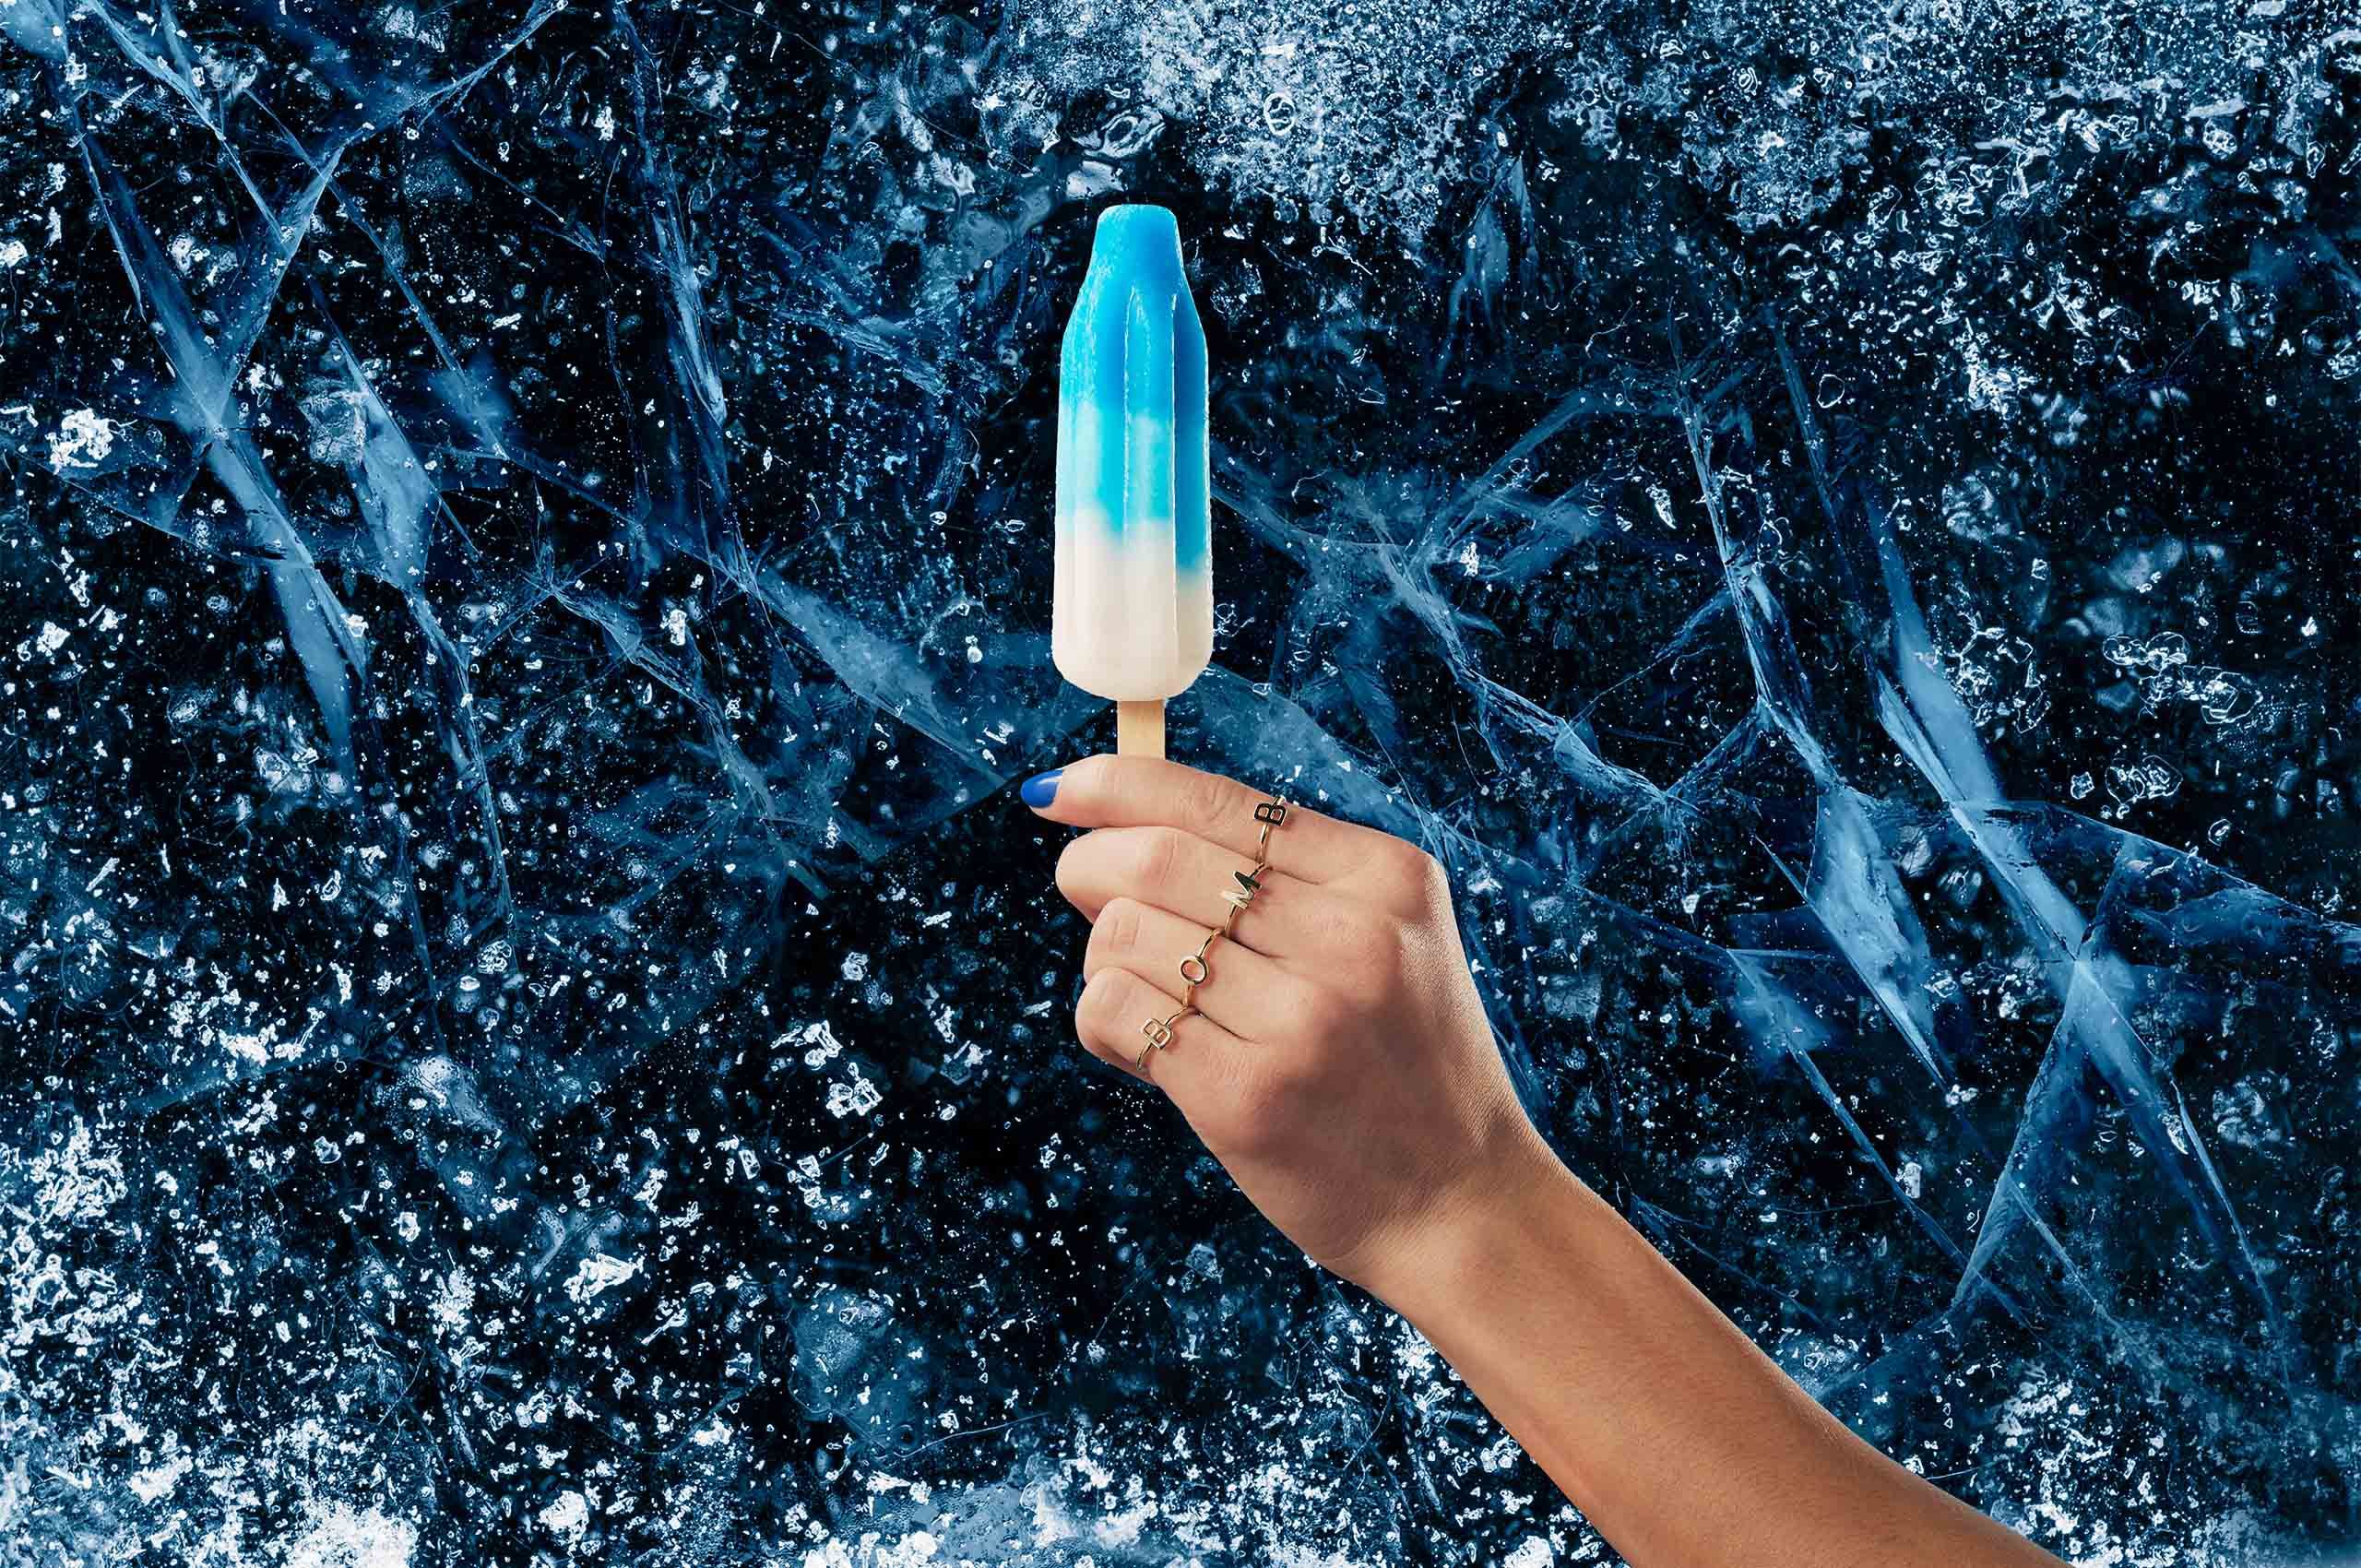 Popsicle Advertising By Chicago Lifestyle Food Photographer Jeff Schear